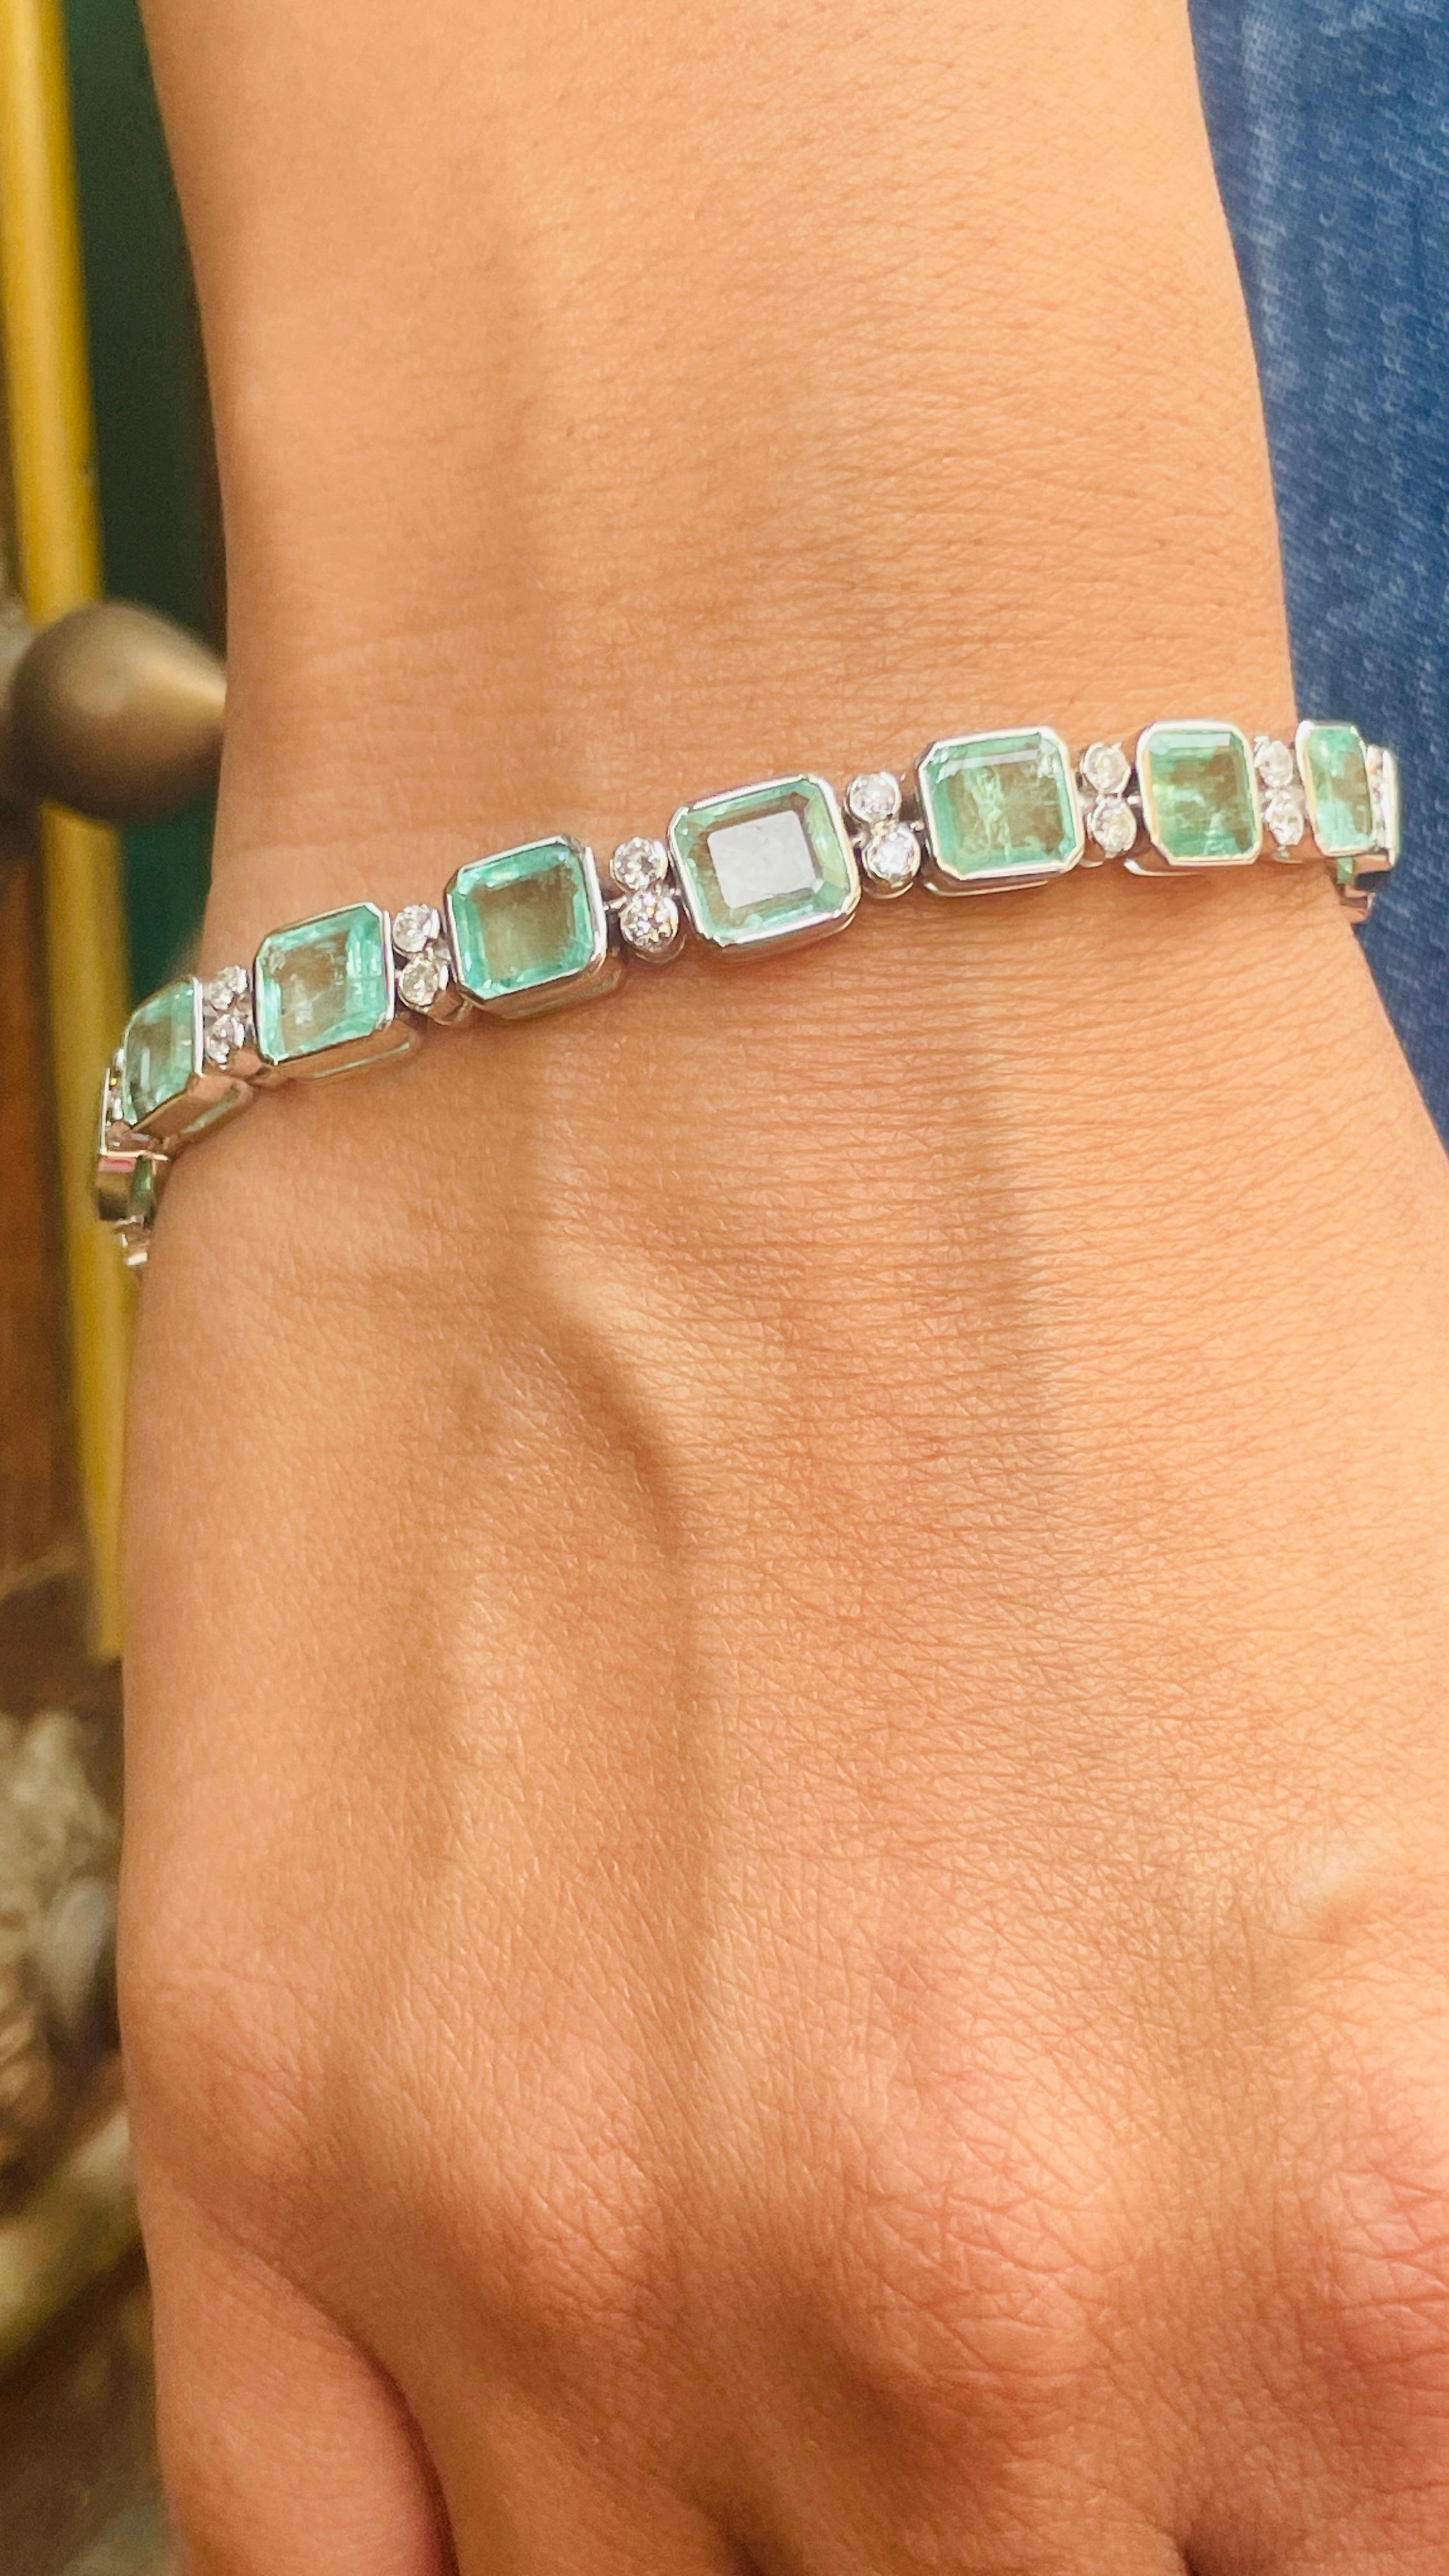 33.58 Carat Octagon Cut Emerald Tennis Bracelet with Diamonds in 18K White Gold For Sale 5